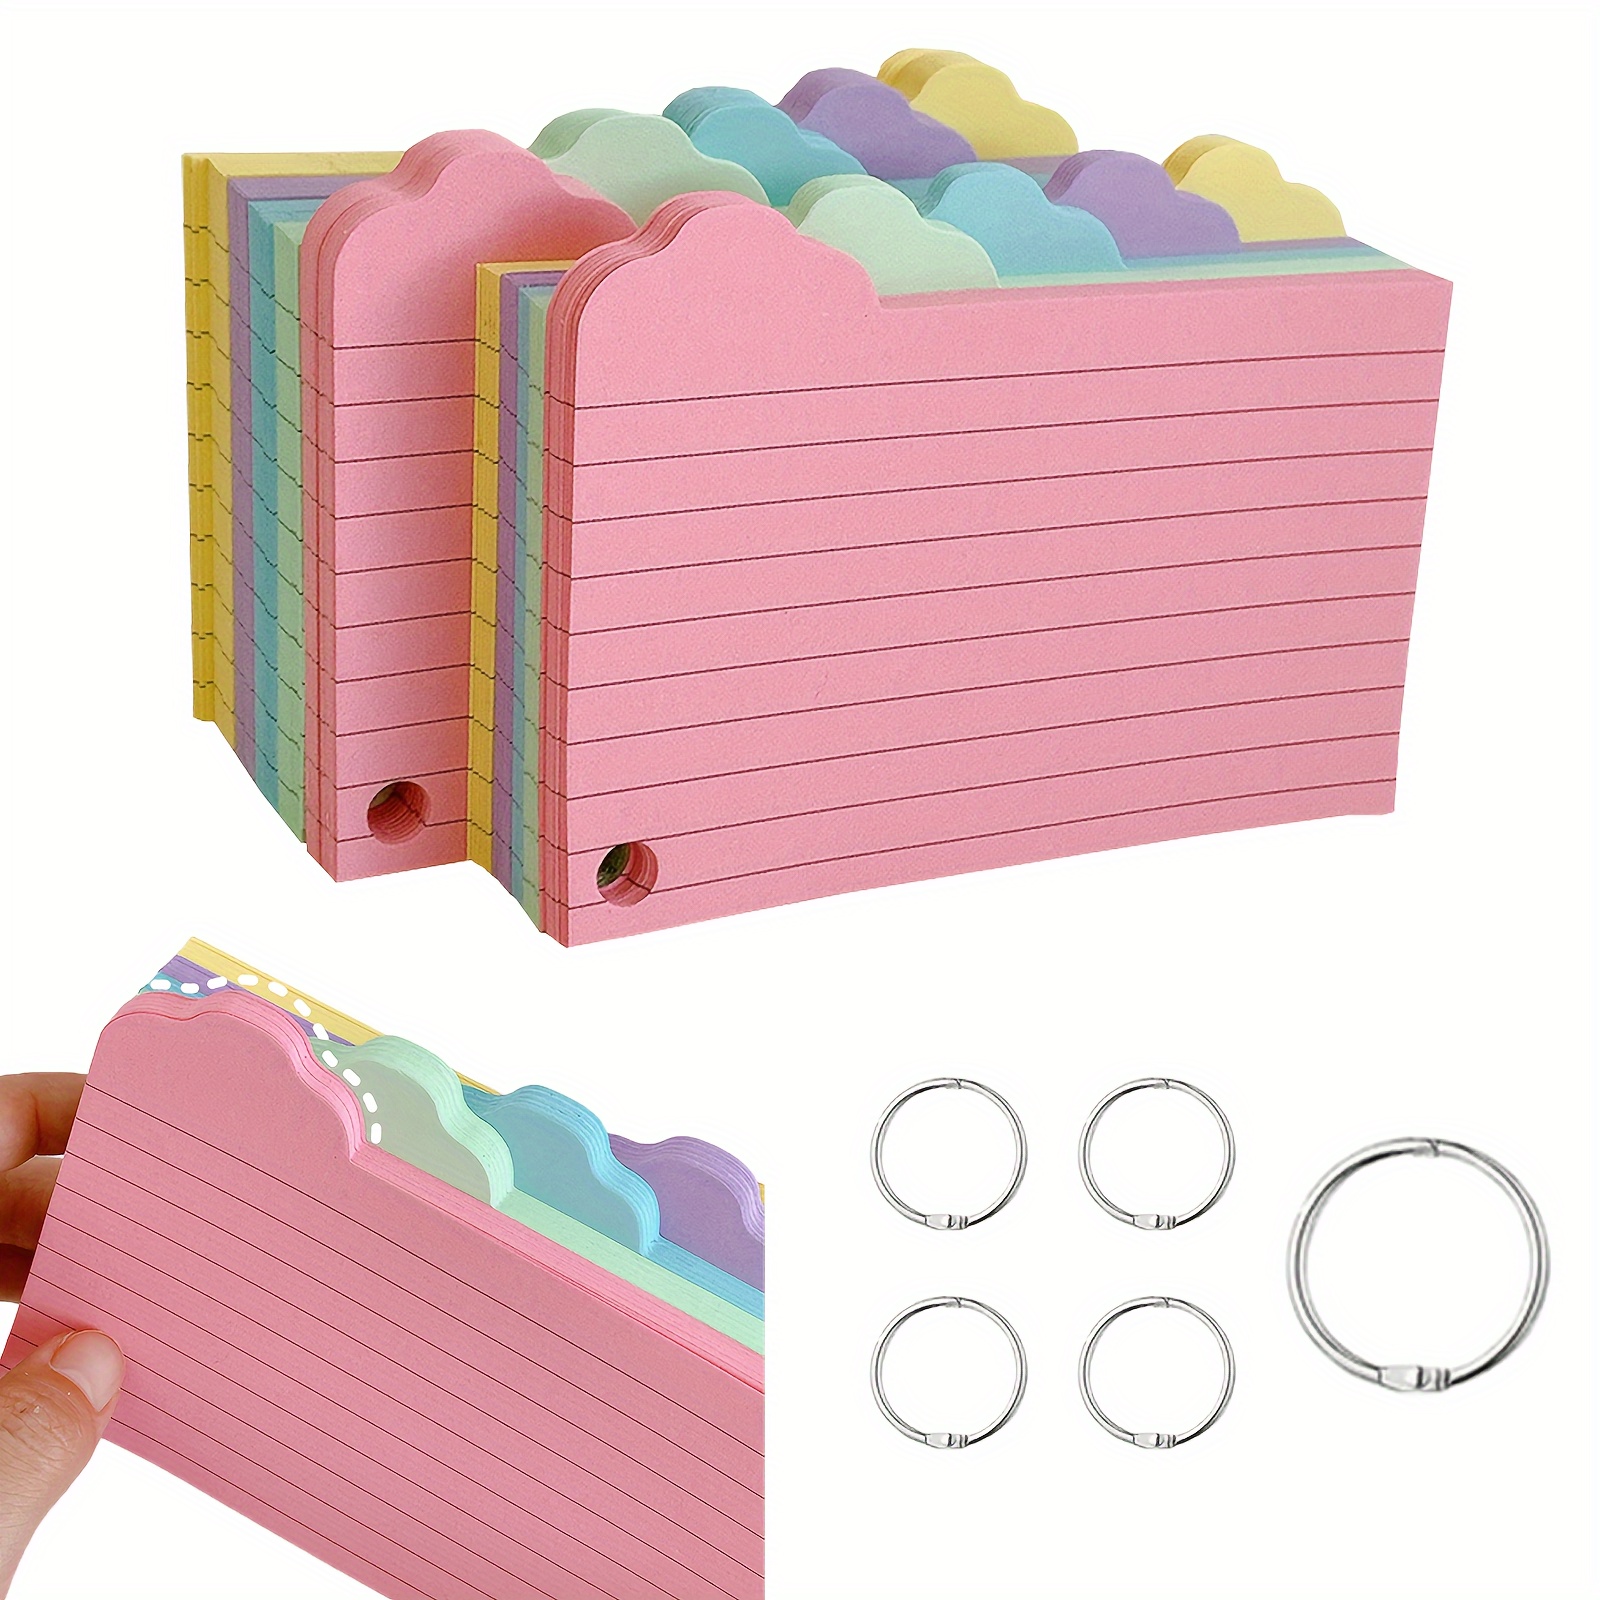 

125 Index Cards, 3x5 Inch Rule Index Cards, With 5 Ring Blank Drawing Cards Lined Index Cards Heavy Duty Note Cards, For Learning Office Home School Supplies